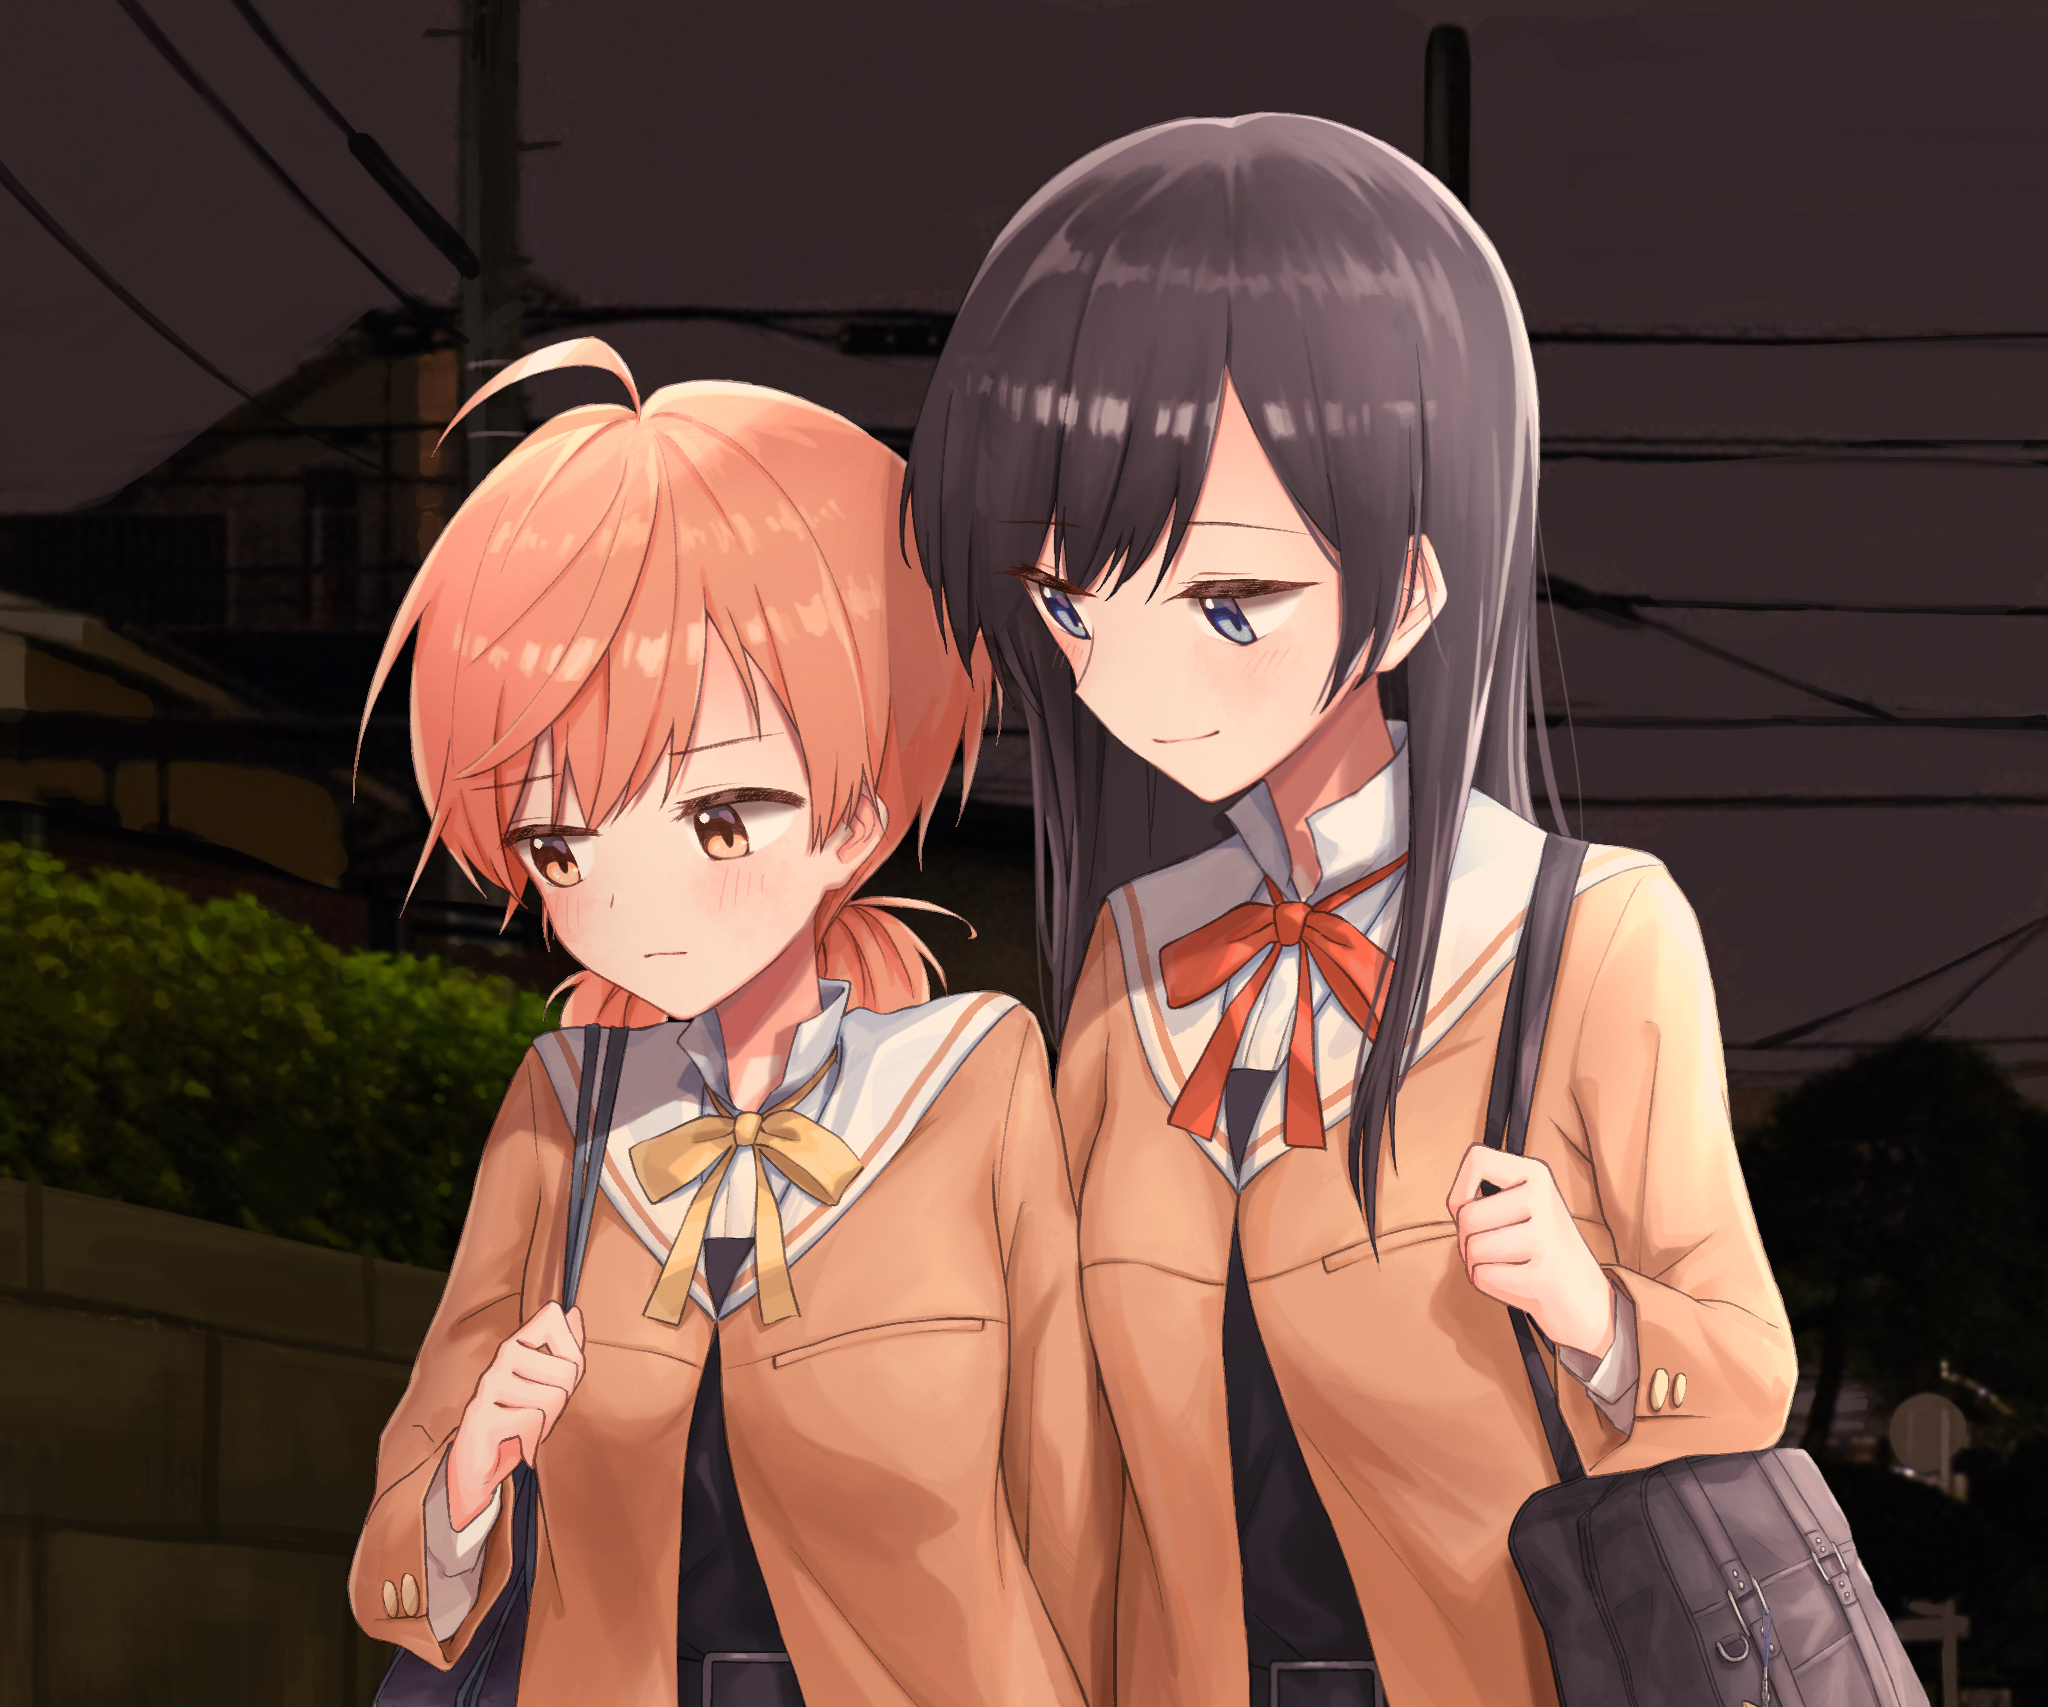 Anime Bloom into You HD Wallpaper | Background Image